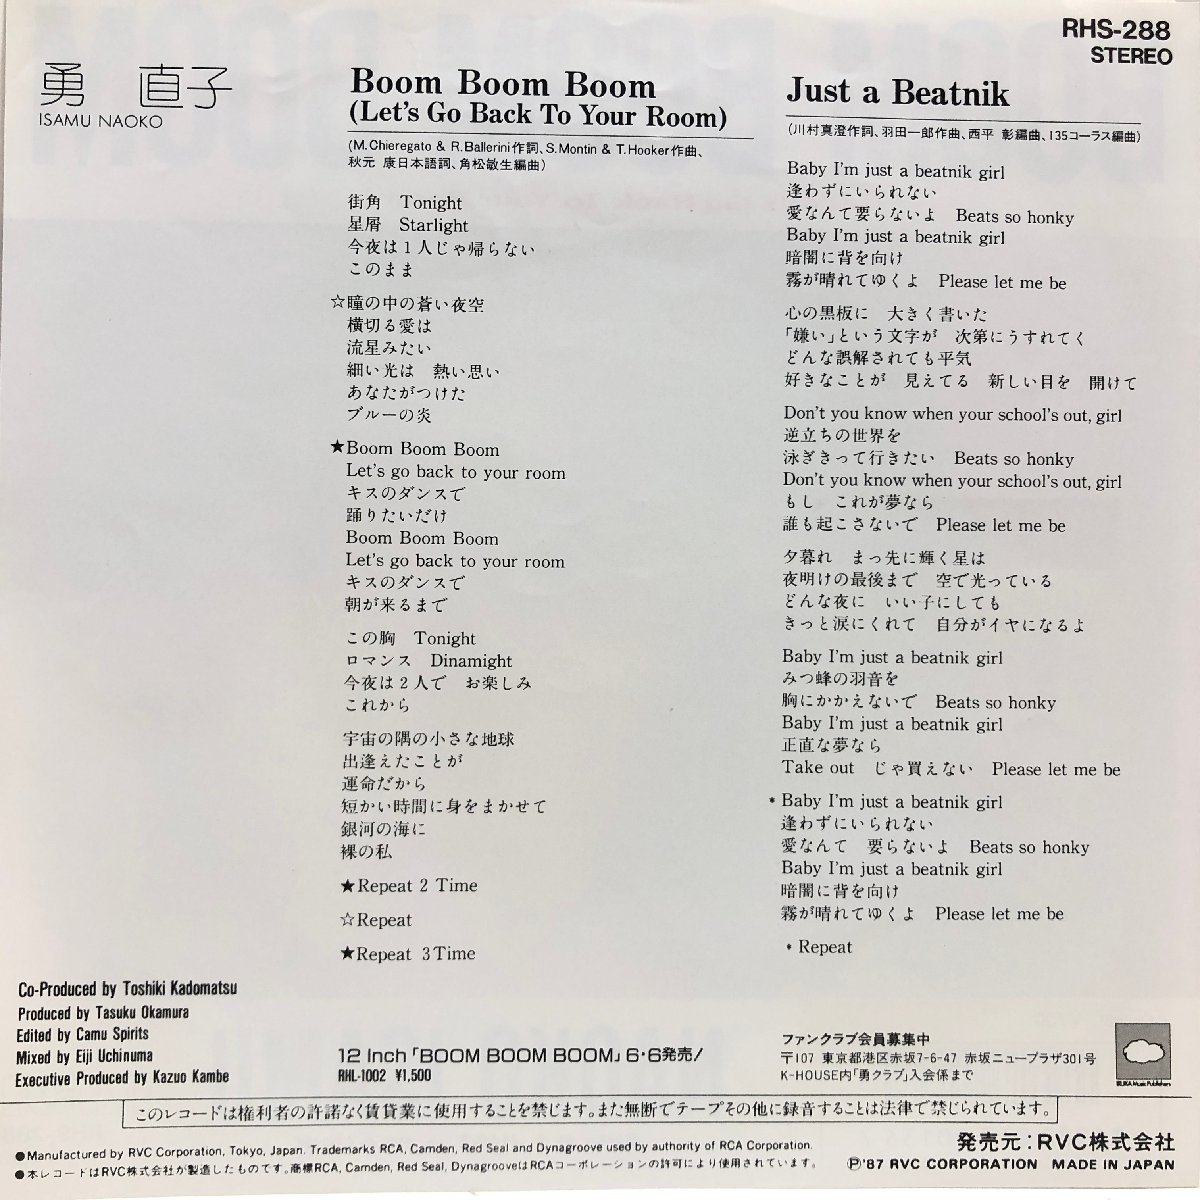 【EP】勇 直子 / BOOM BOOM BOOM(Let's Go Back To Your Room) cw Just A Beatnik / 角松敏生 プロデュース / 見 RCA RHS-288 ▲の画像2